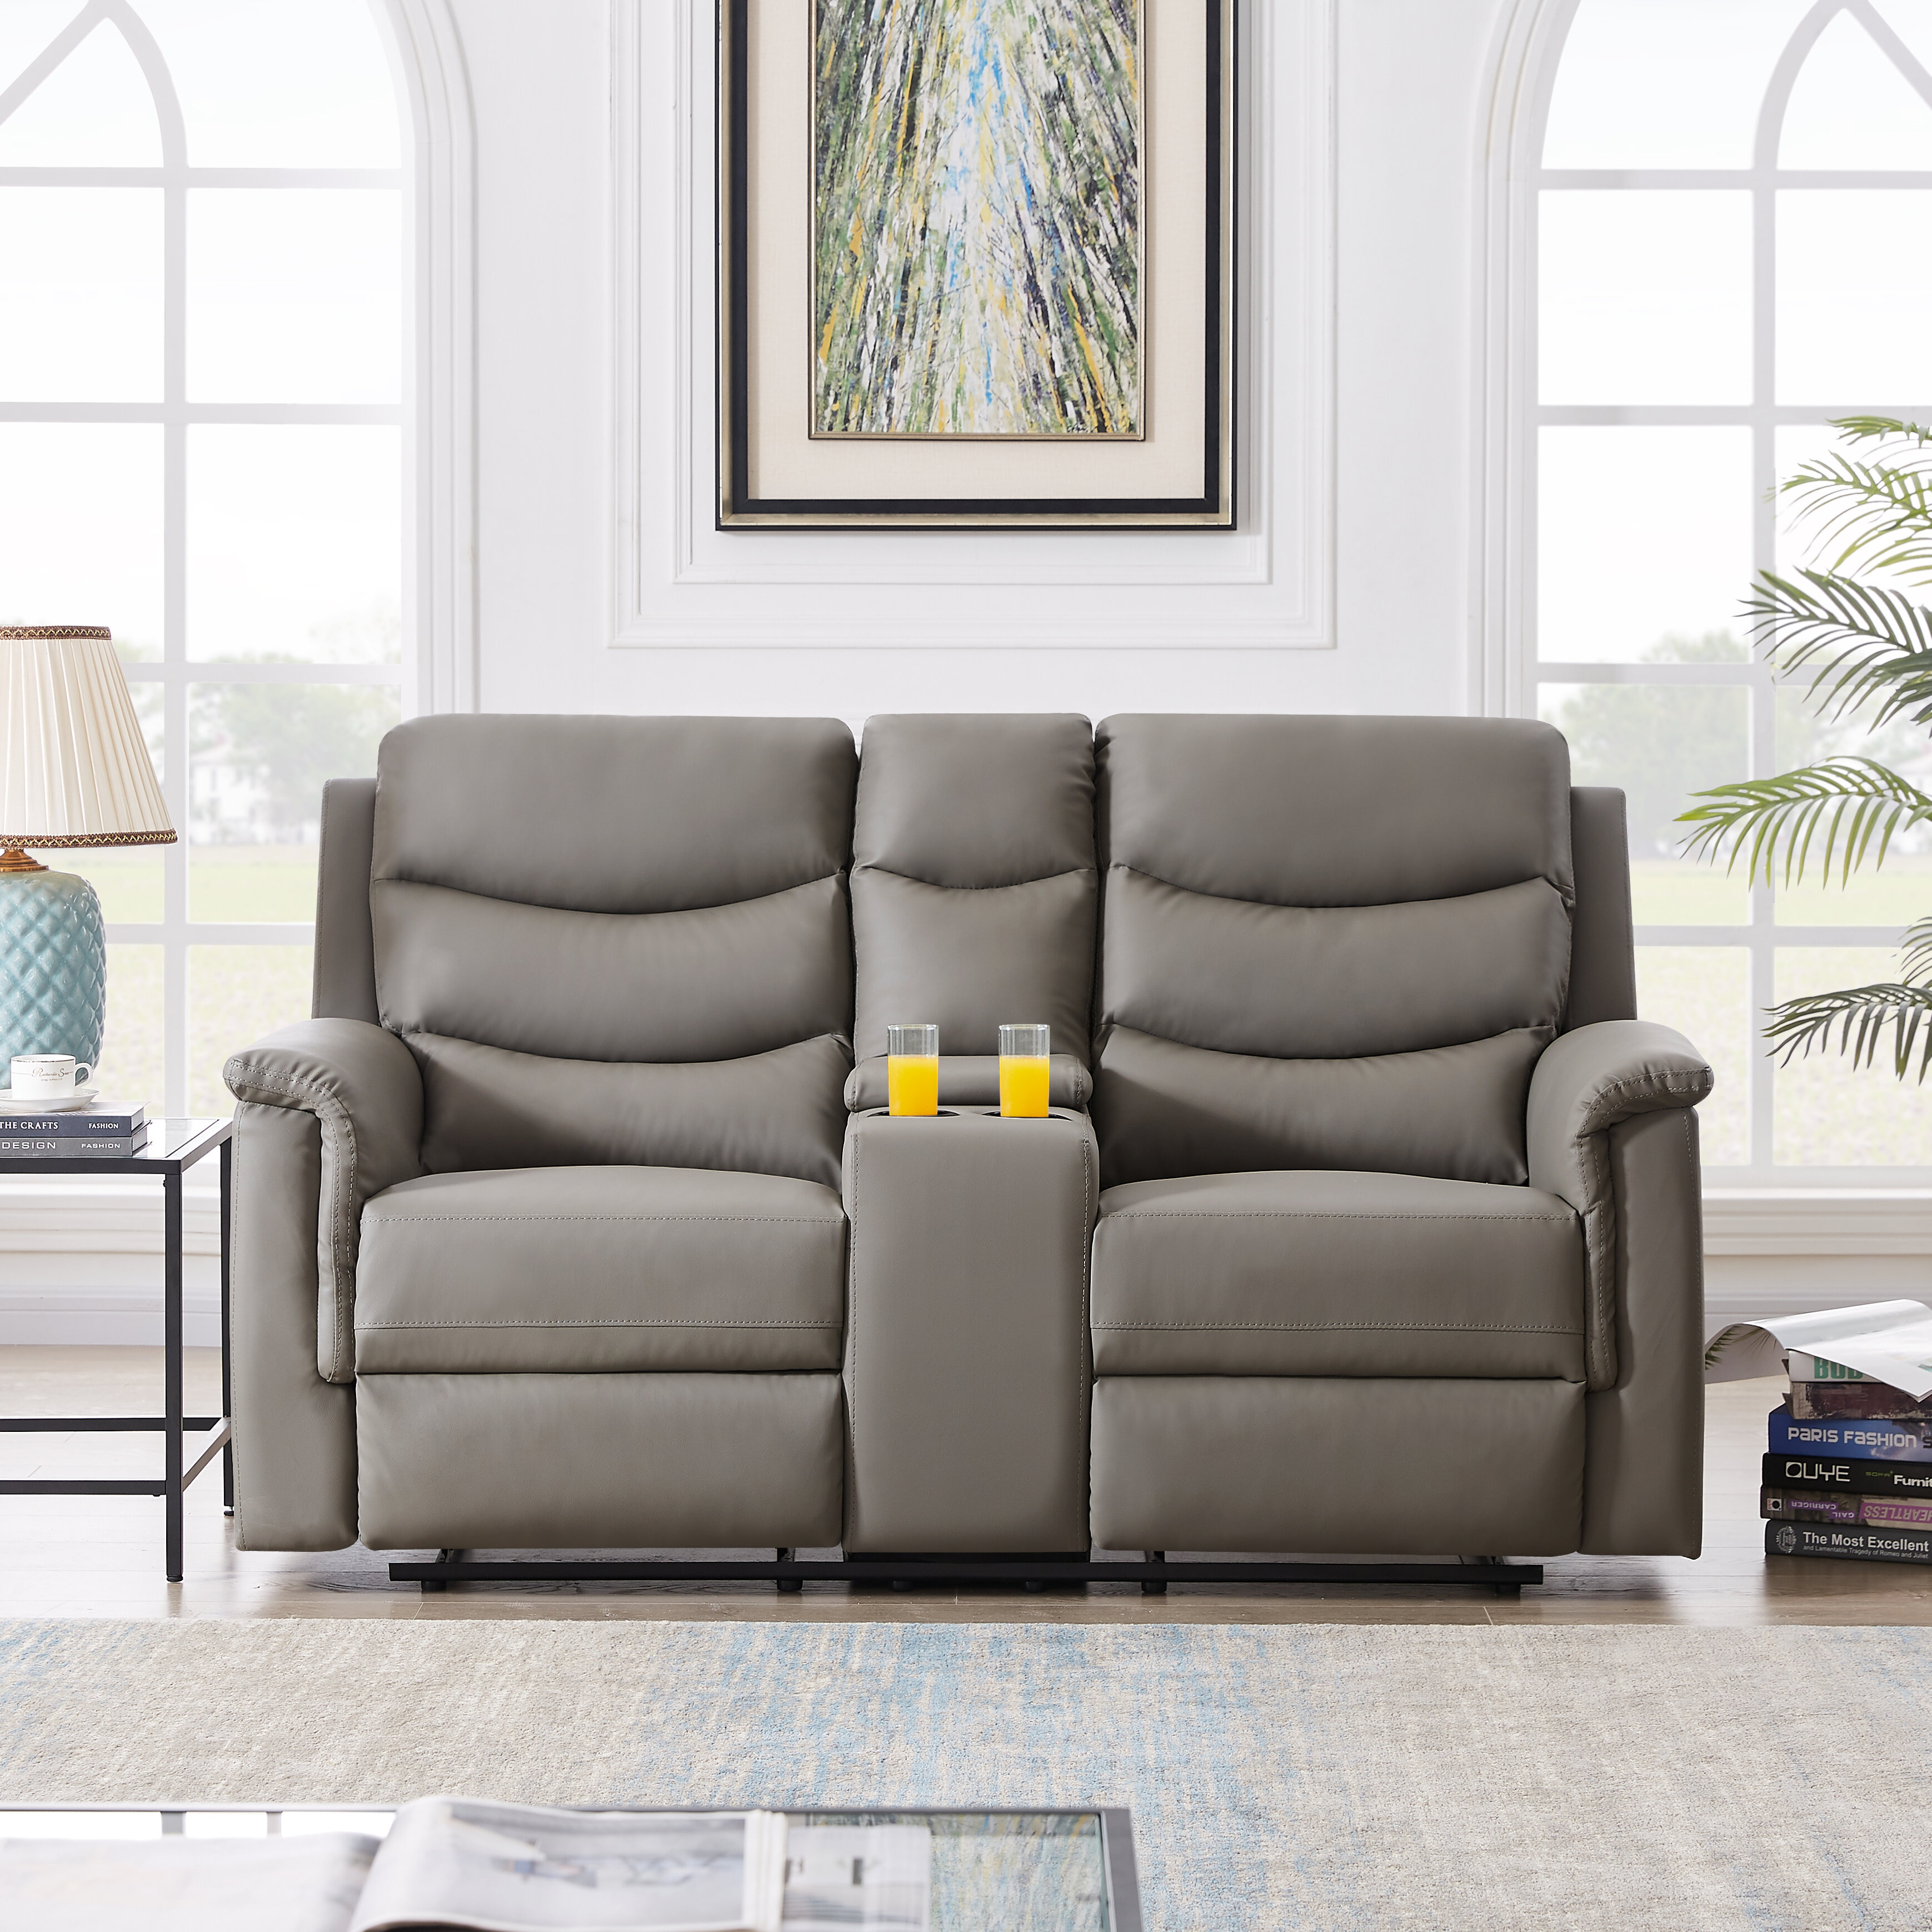 Details about   NEW Sofa Loveseat Chair Black Leather Living Room 5-Seater Recliner & Cupholders 